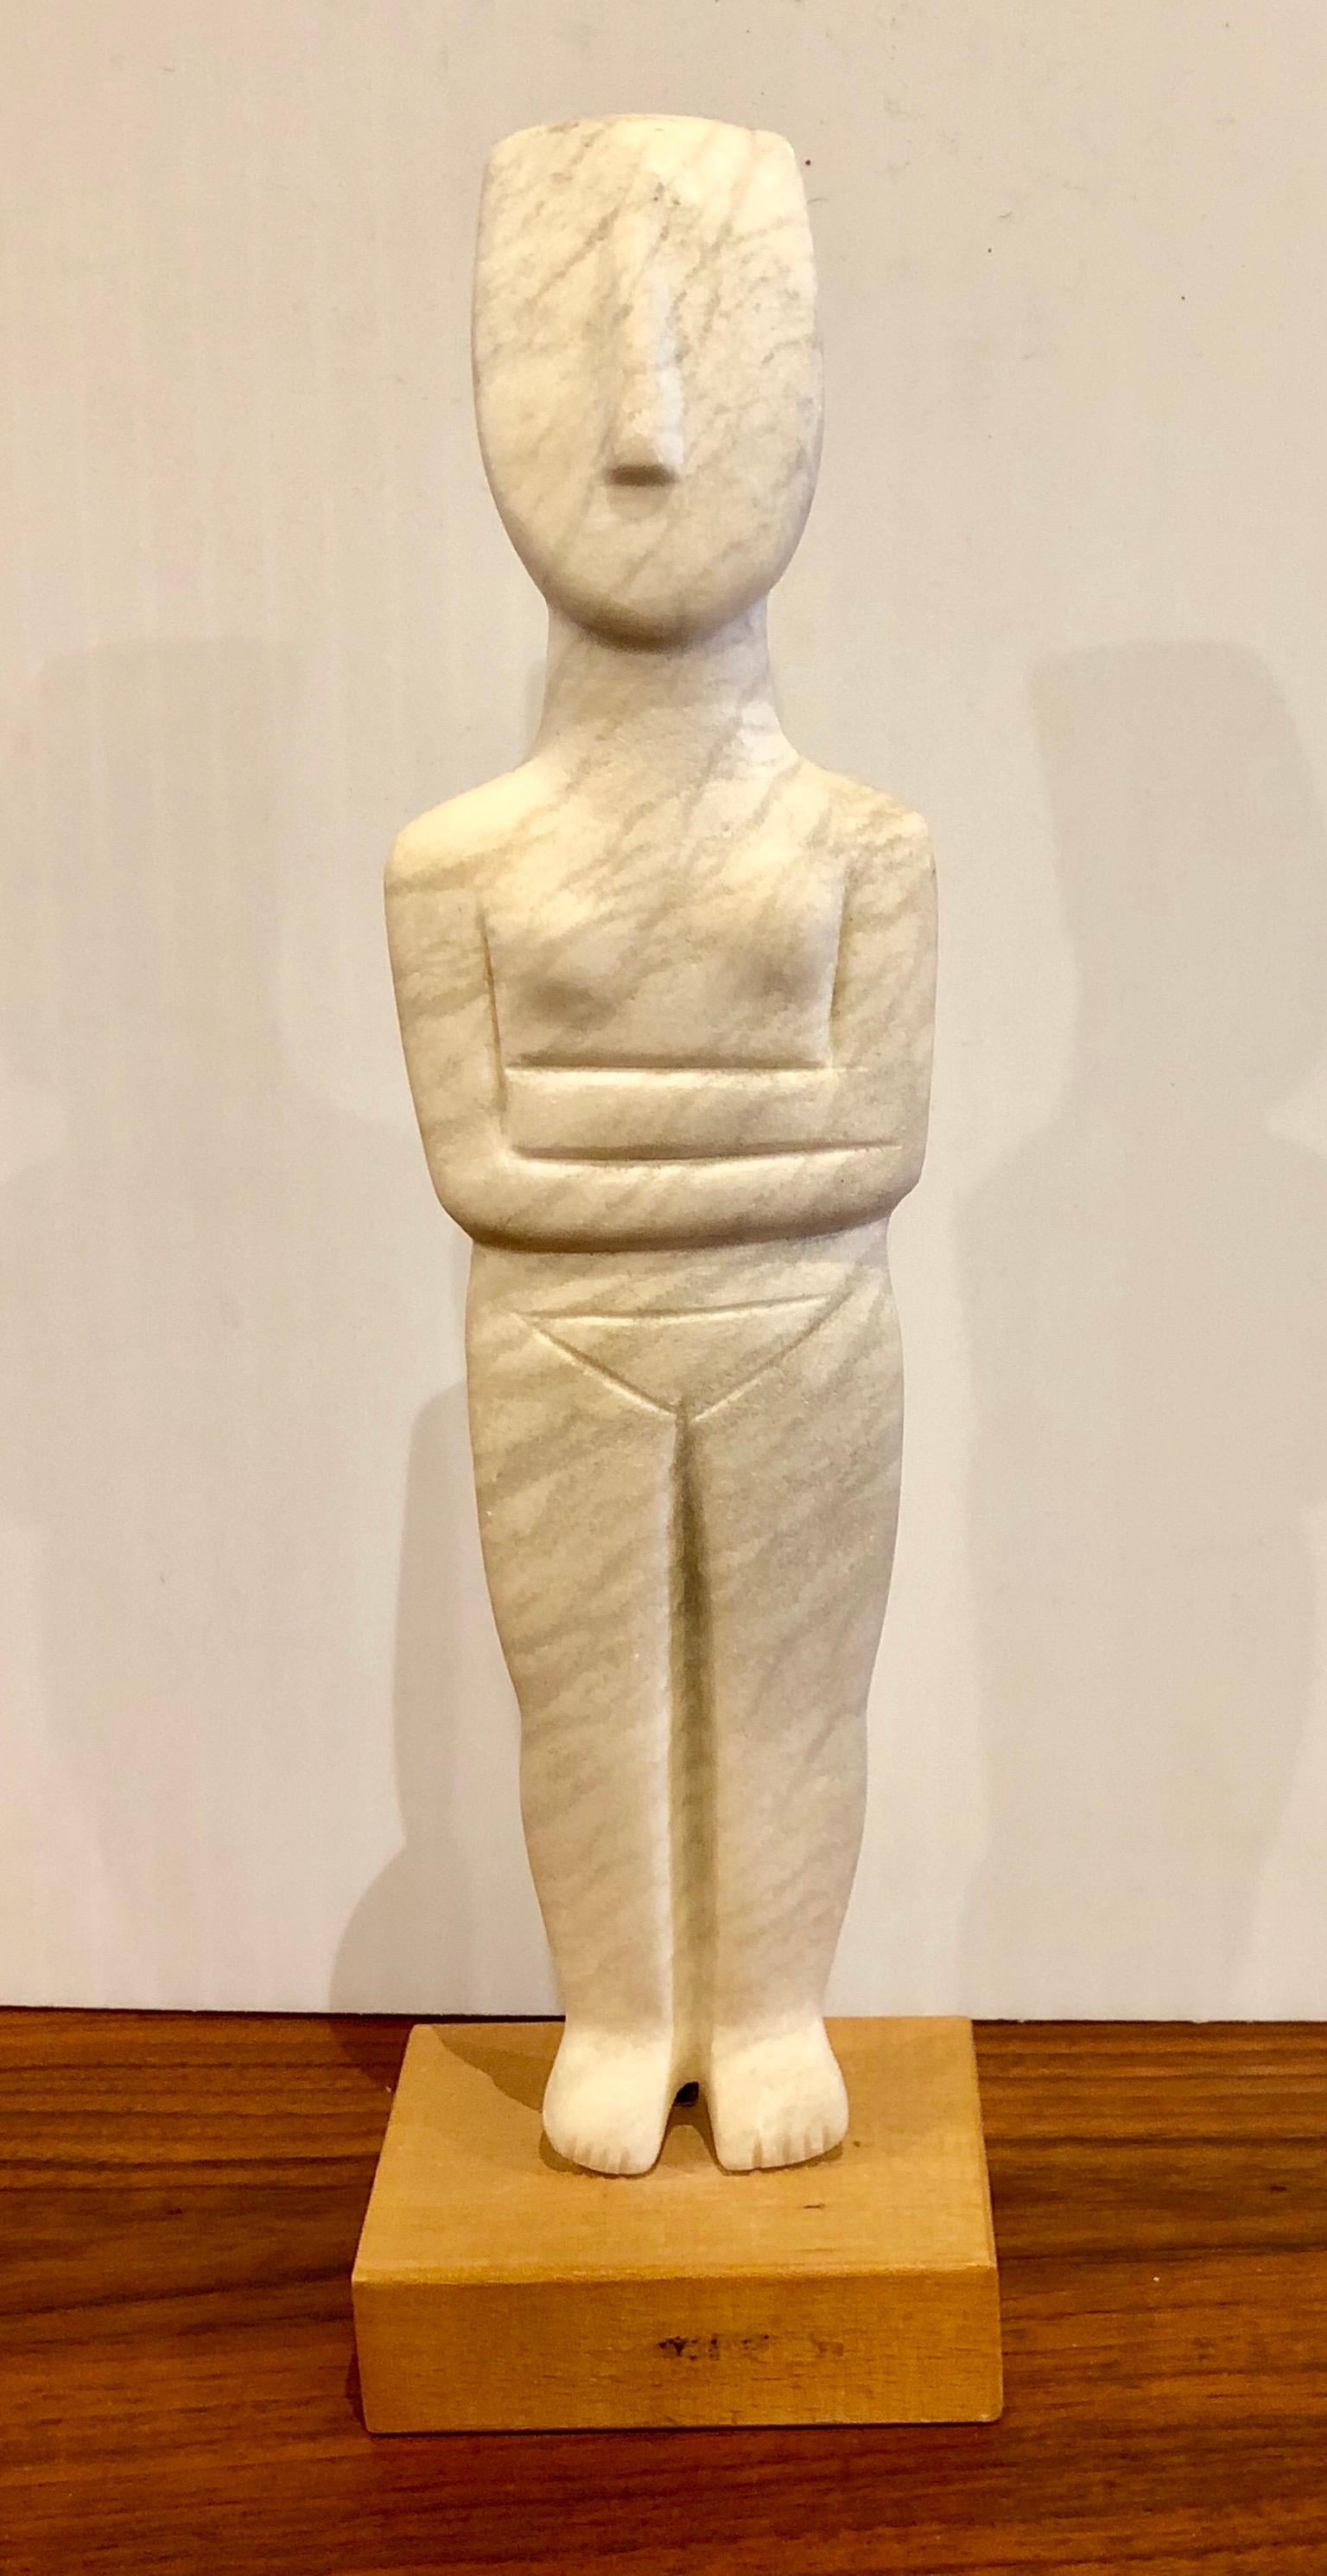 Greek Cycladic Alabaster sculpture on birch wood base, circa 1960s by Cycladic art handmade in alabaster hold by polished brass rod and birch wood base.